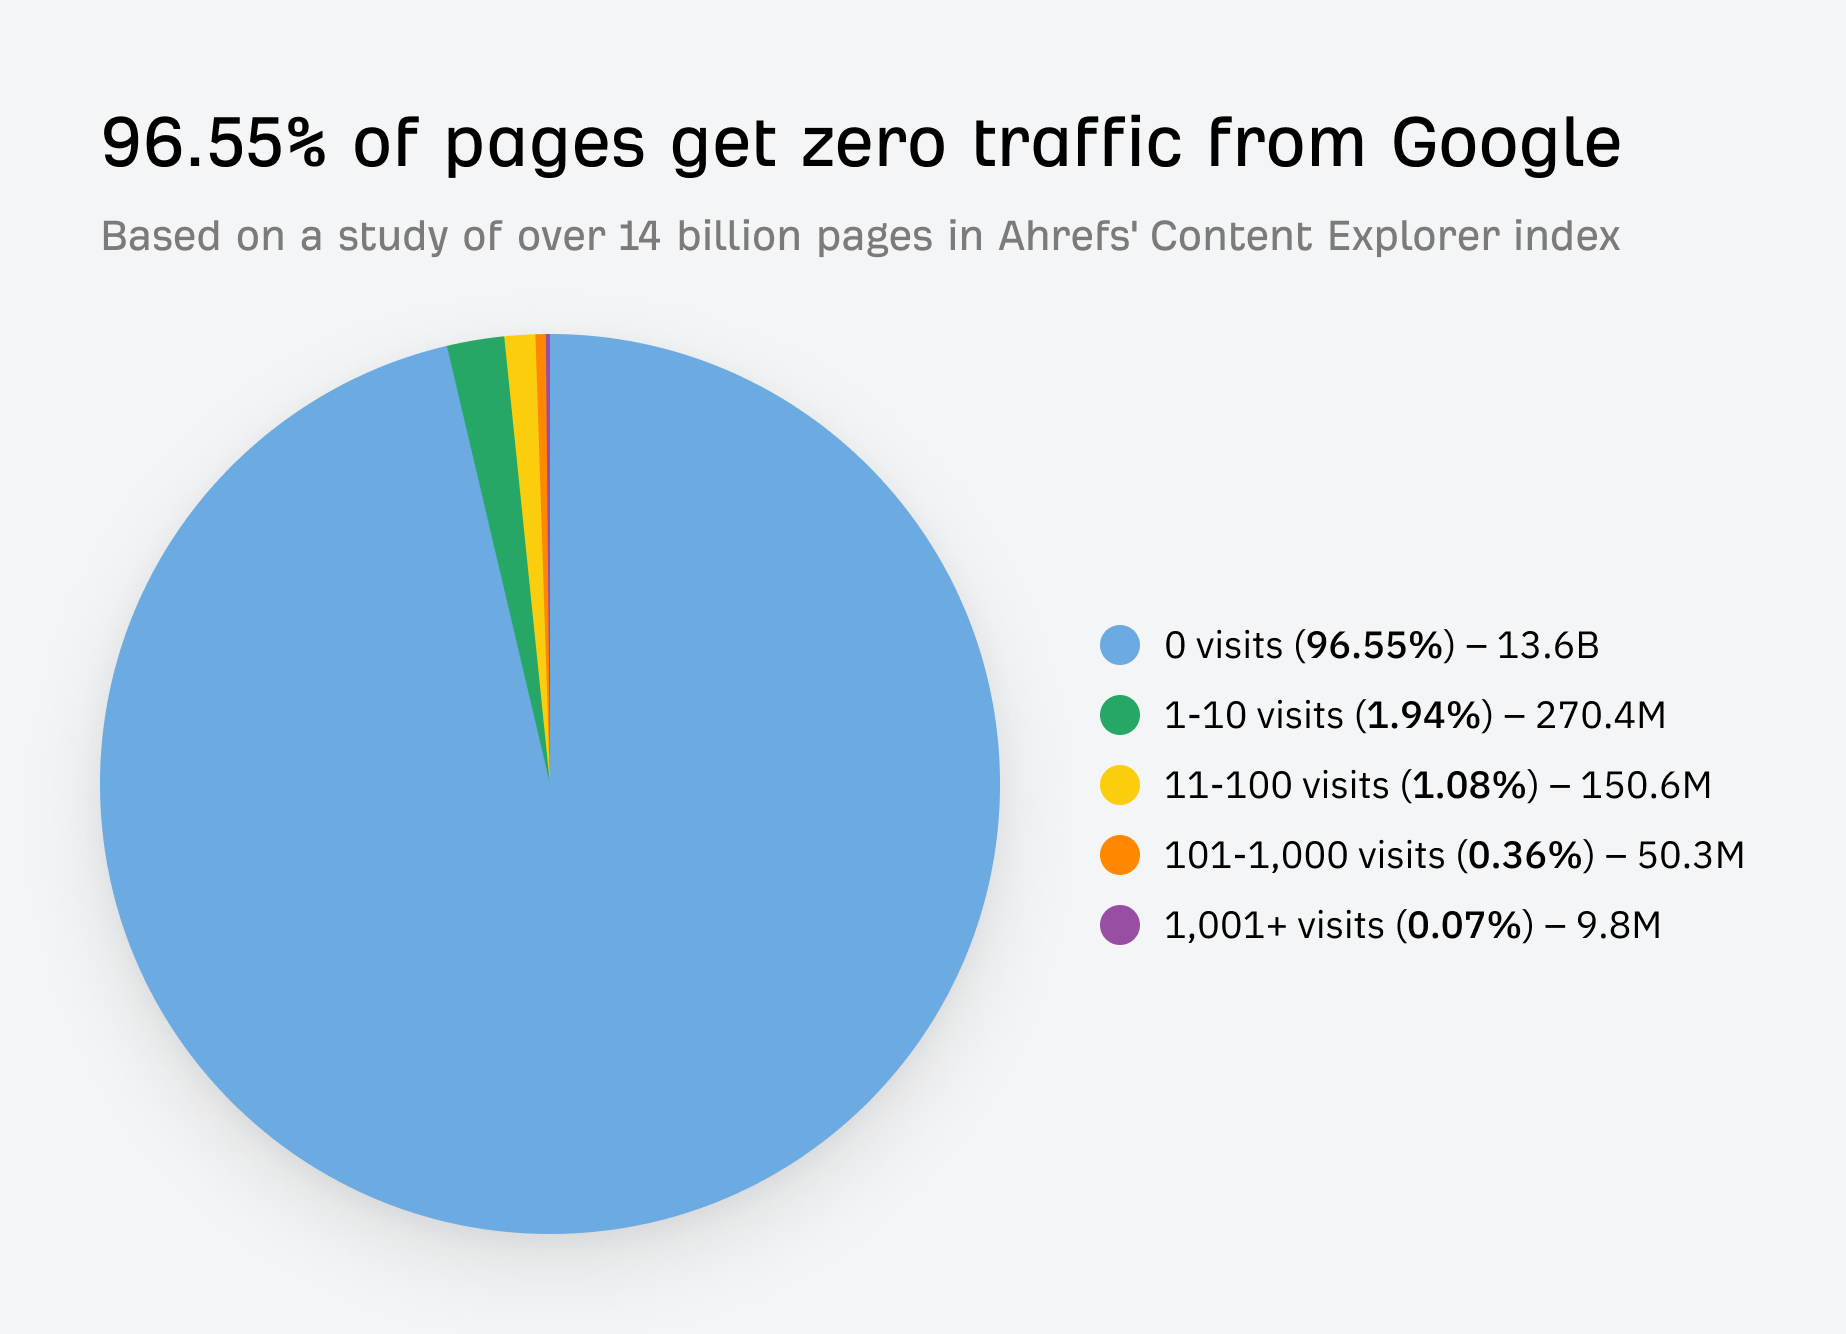 96.55% of content gets zero search traffic from Google